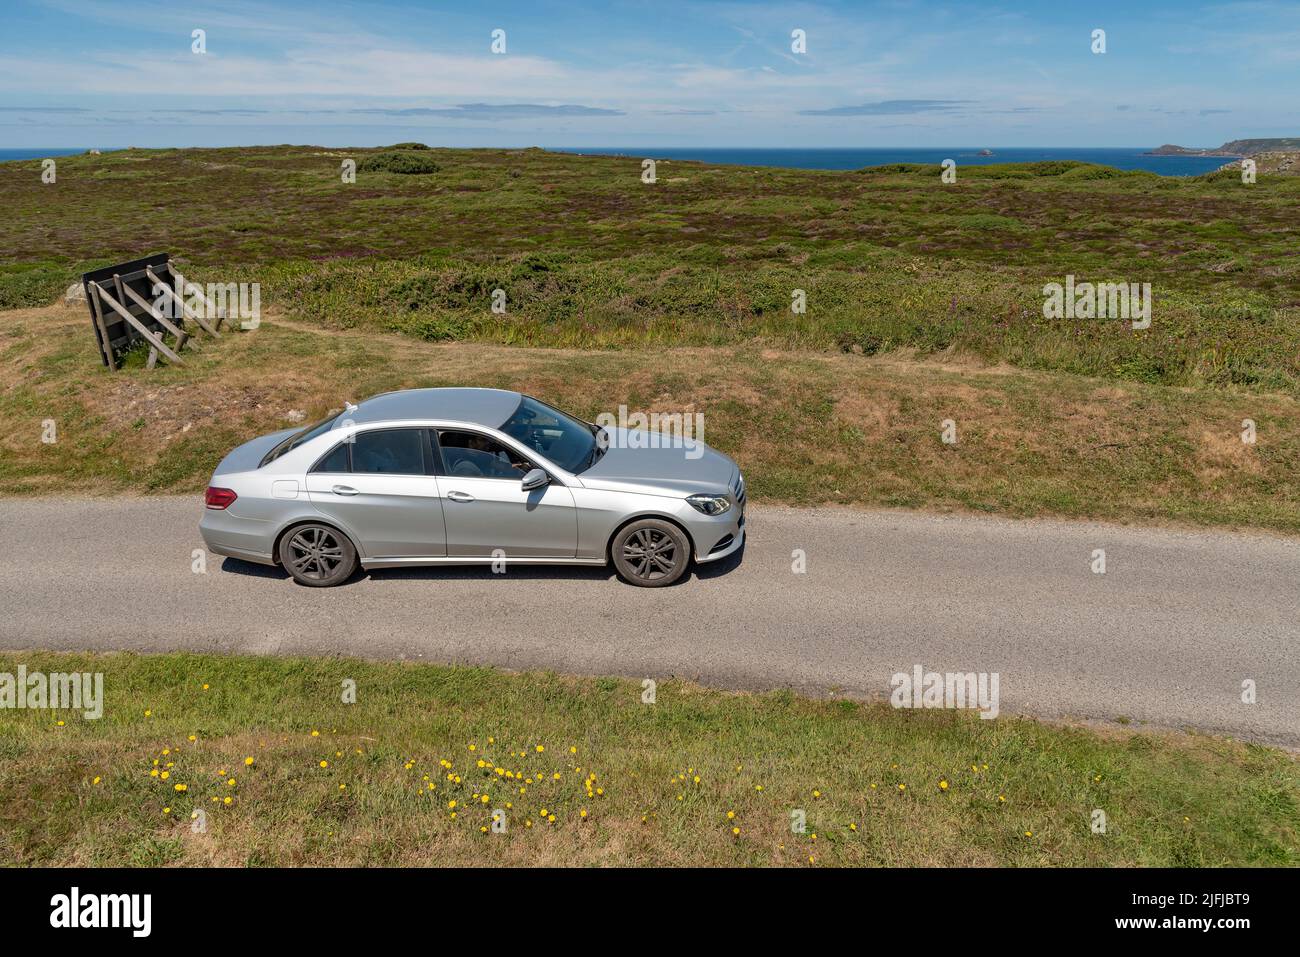 Cornwall, England, UK. 2022. A silver coloured car driving in the  Cornish coastal countryside close to Lands End  on the highway, UK Stock Photo